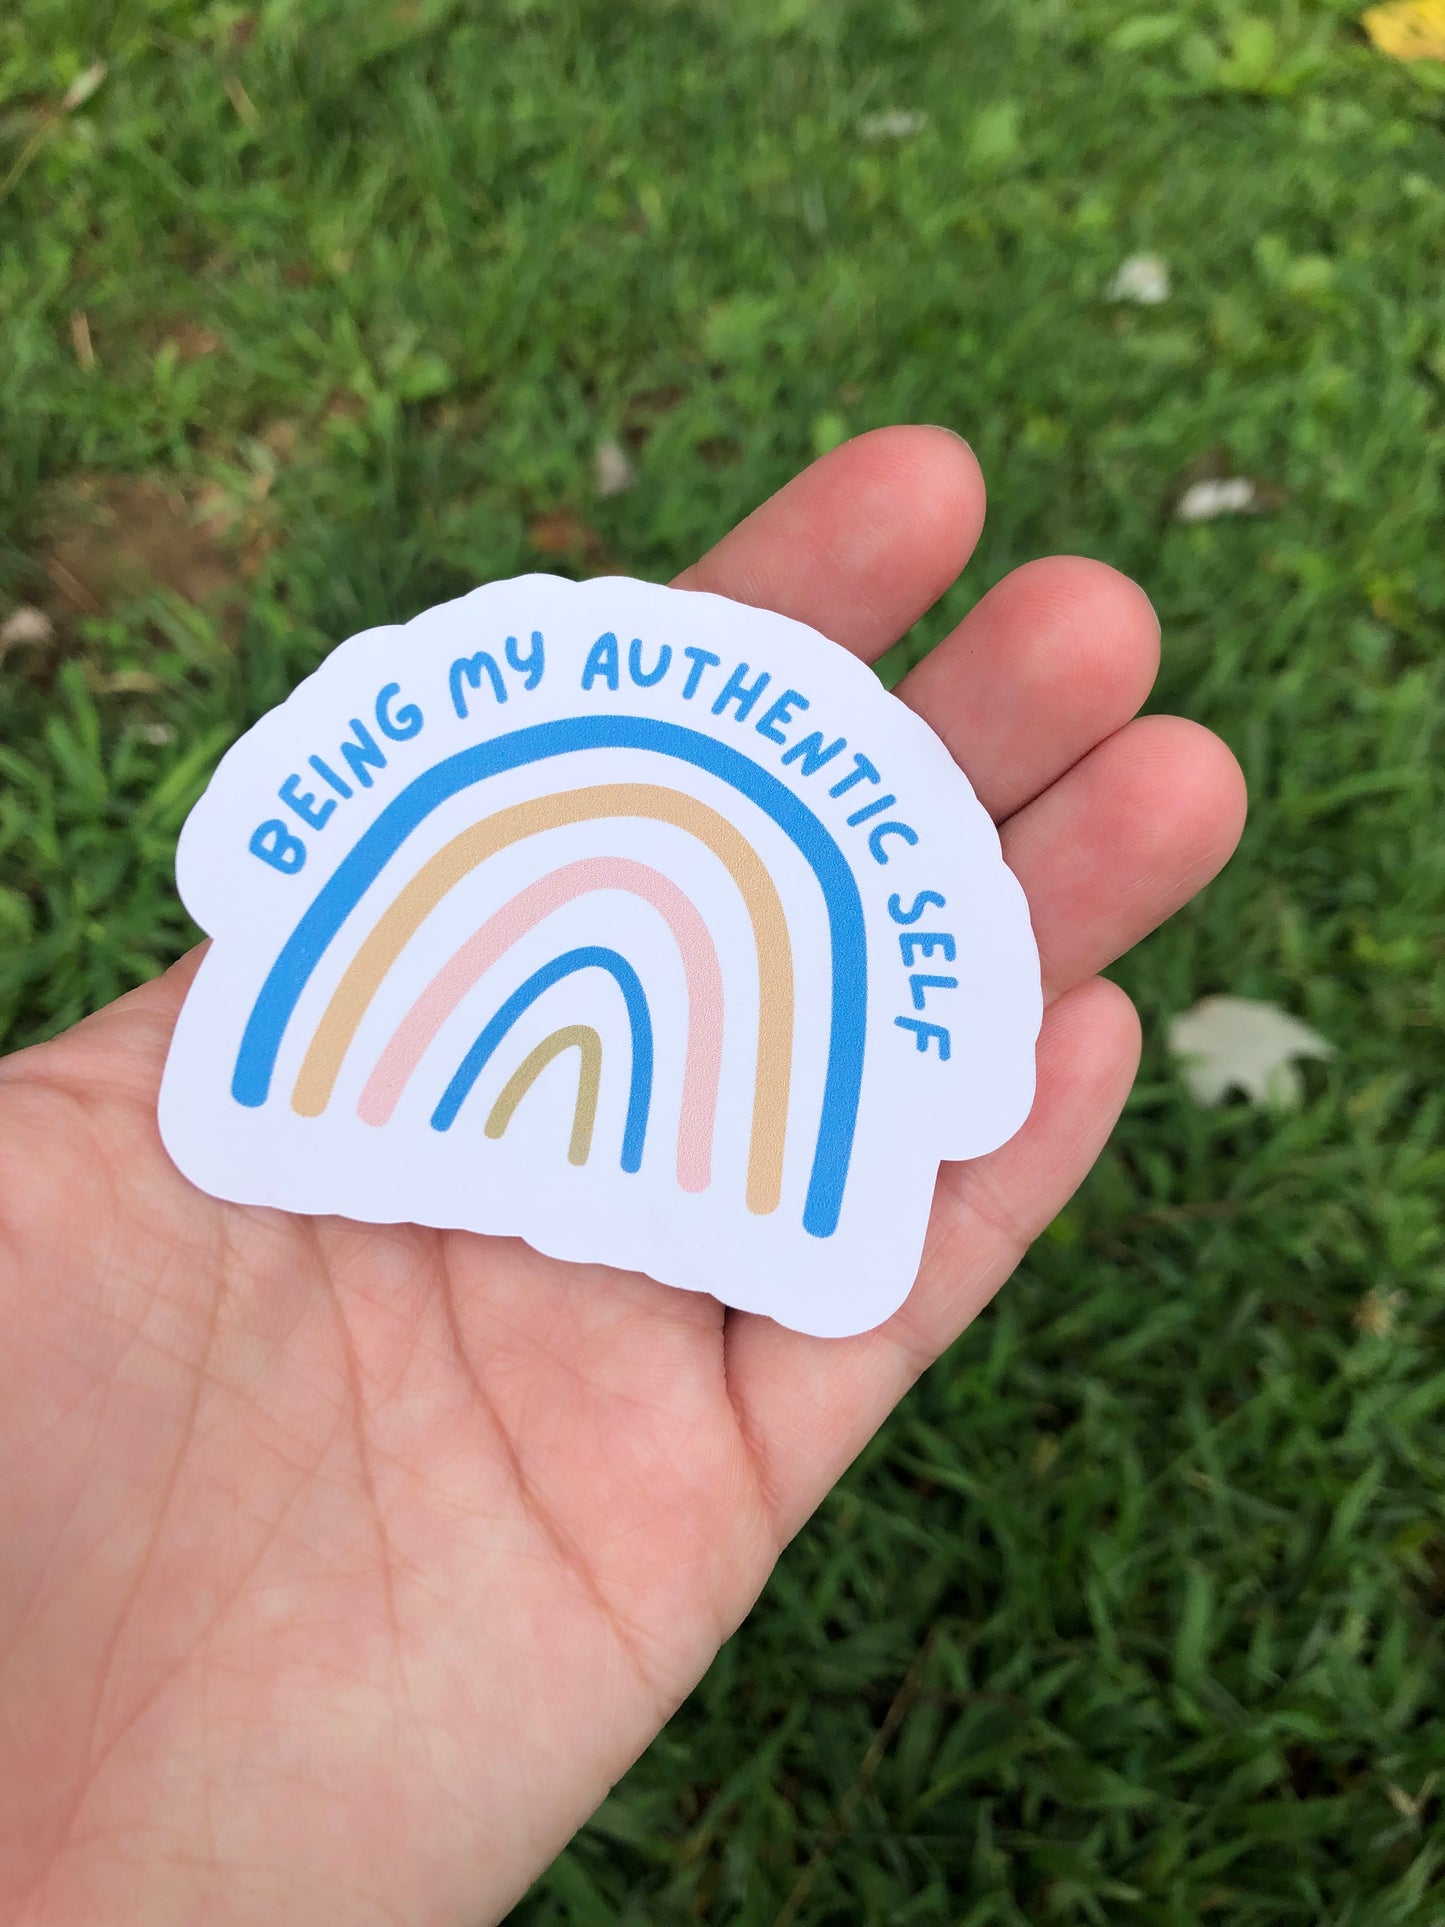 Being My Authentic Self sticker